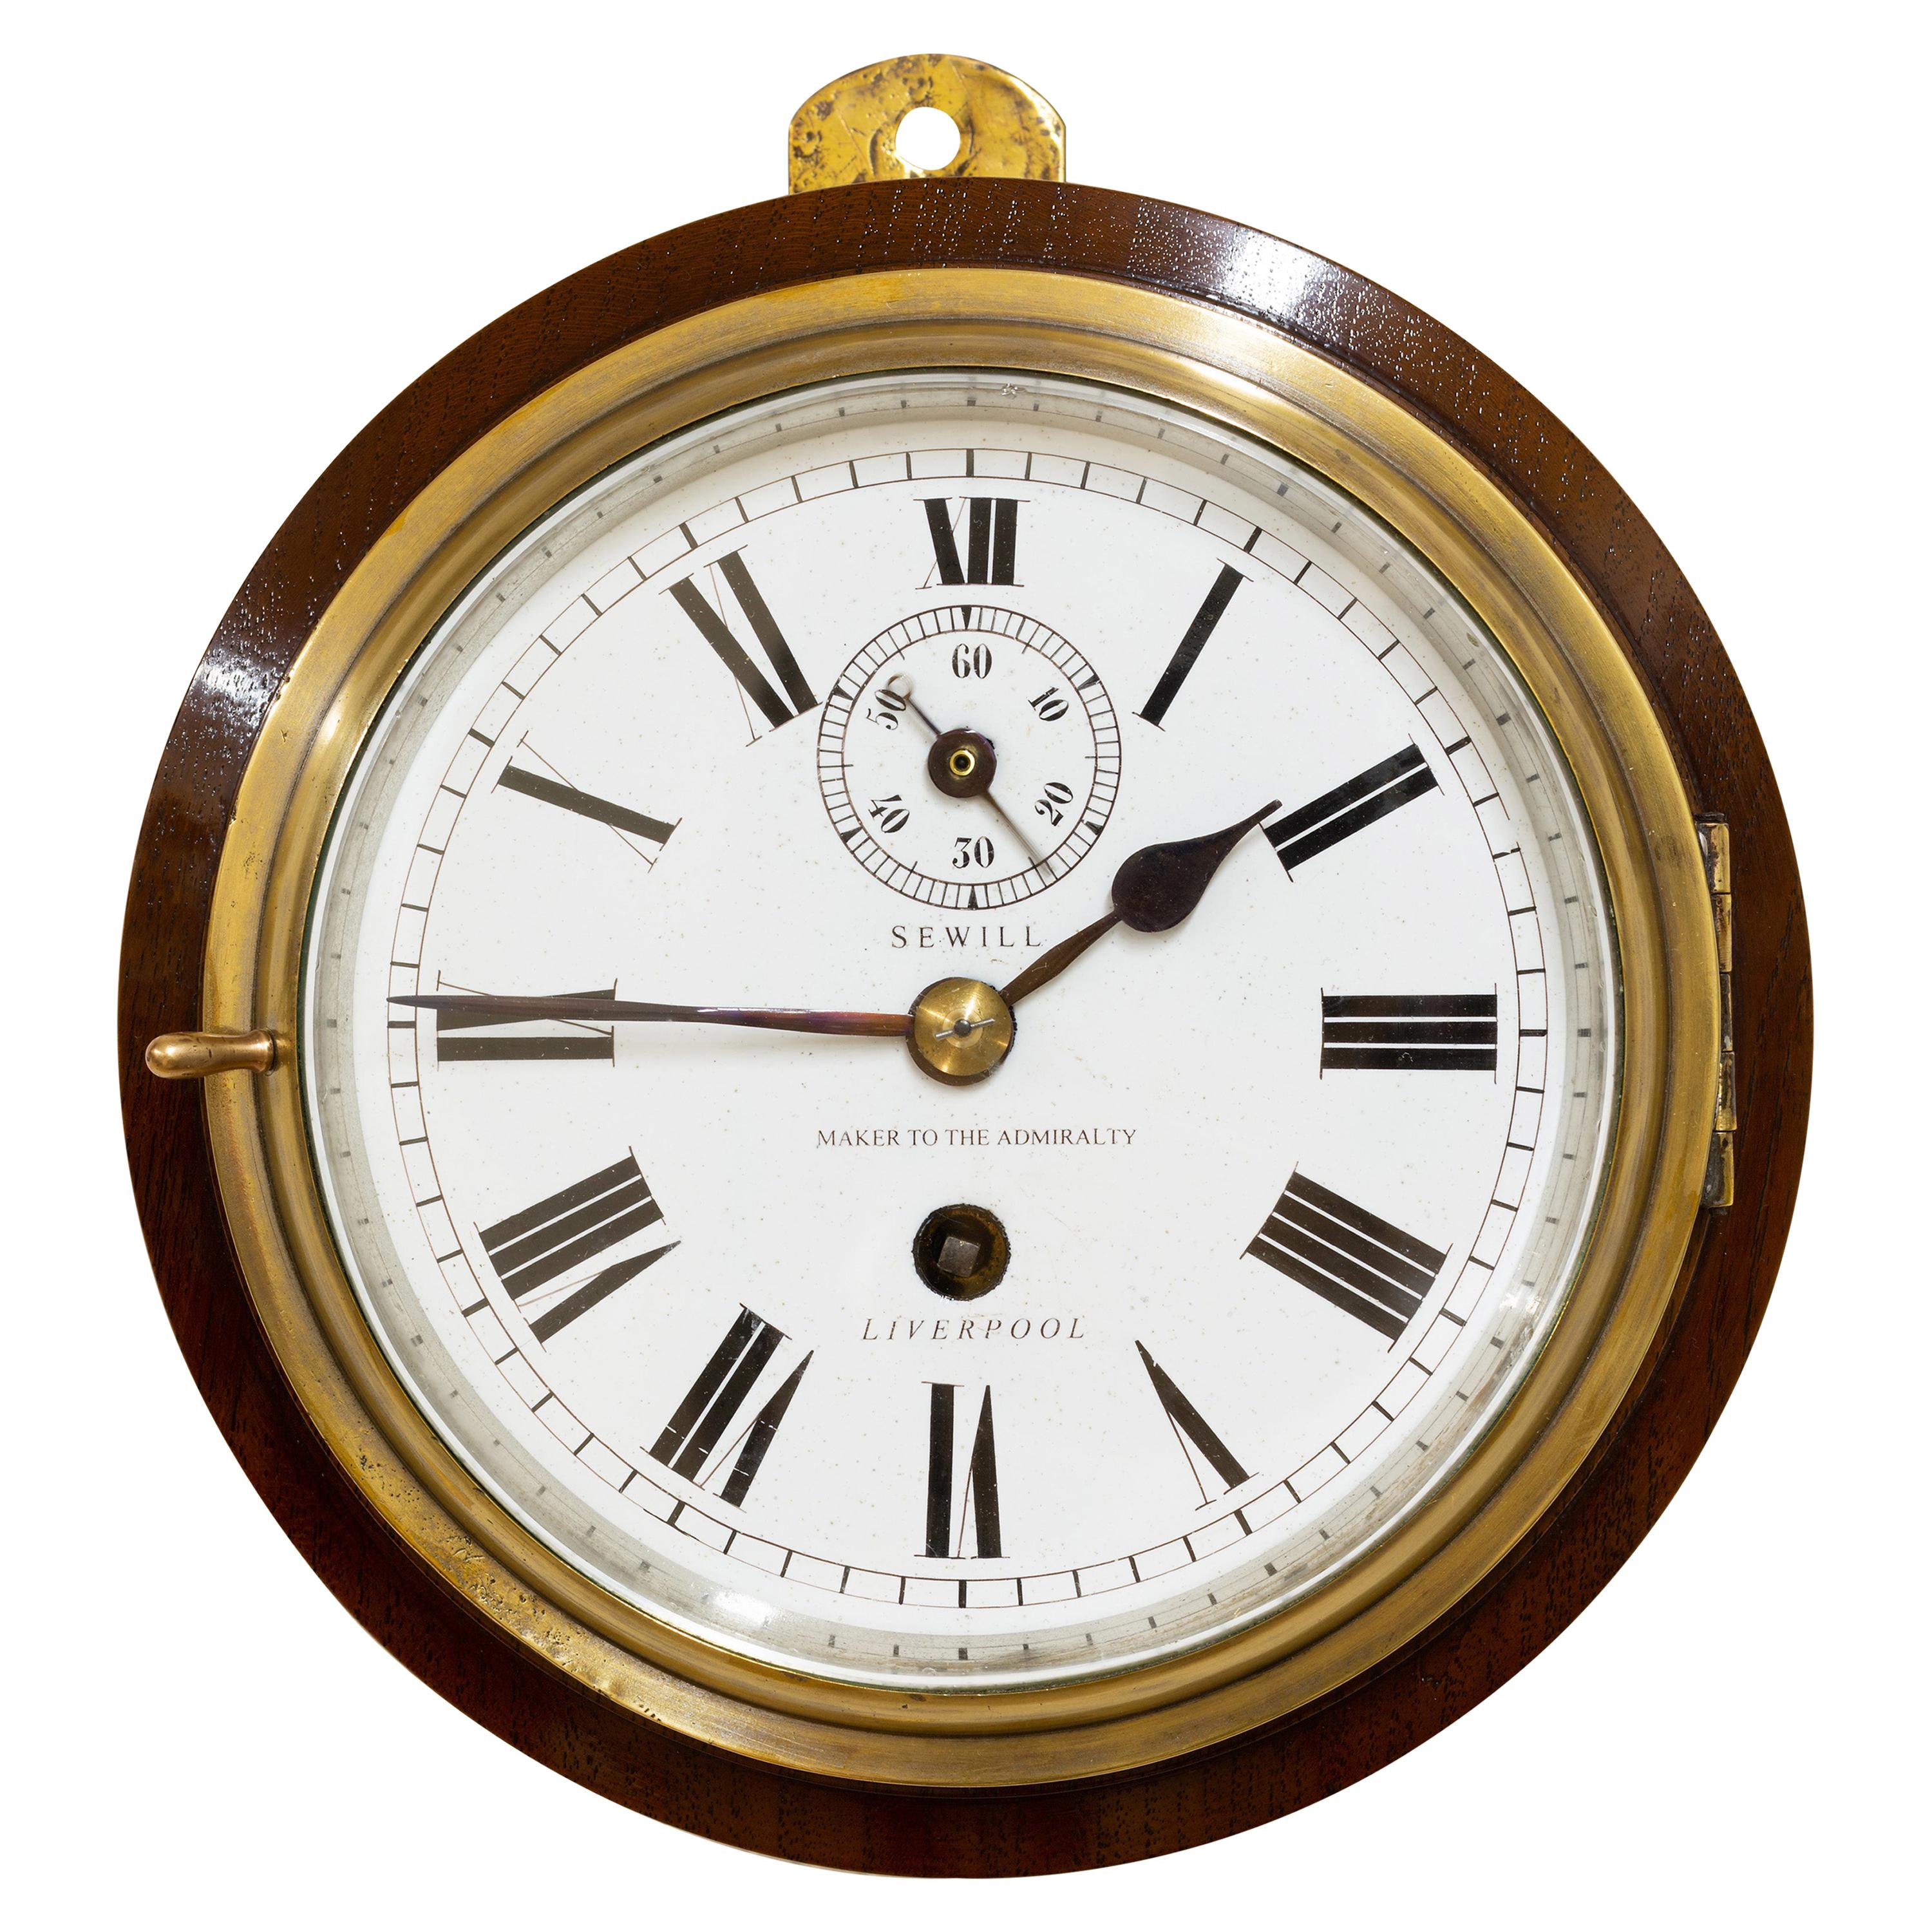 Edwardian Brass Cased Ships Clock by Sewill, Liverpool